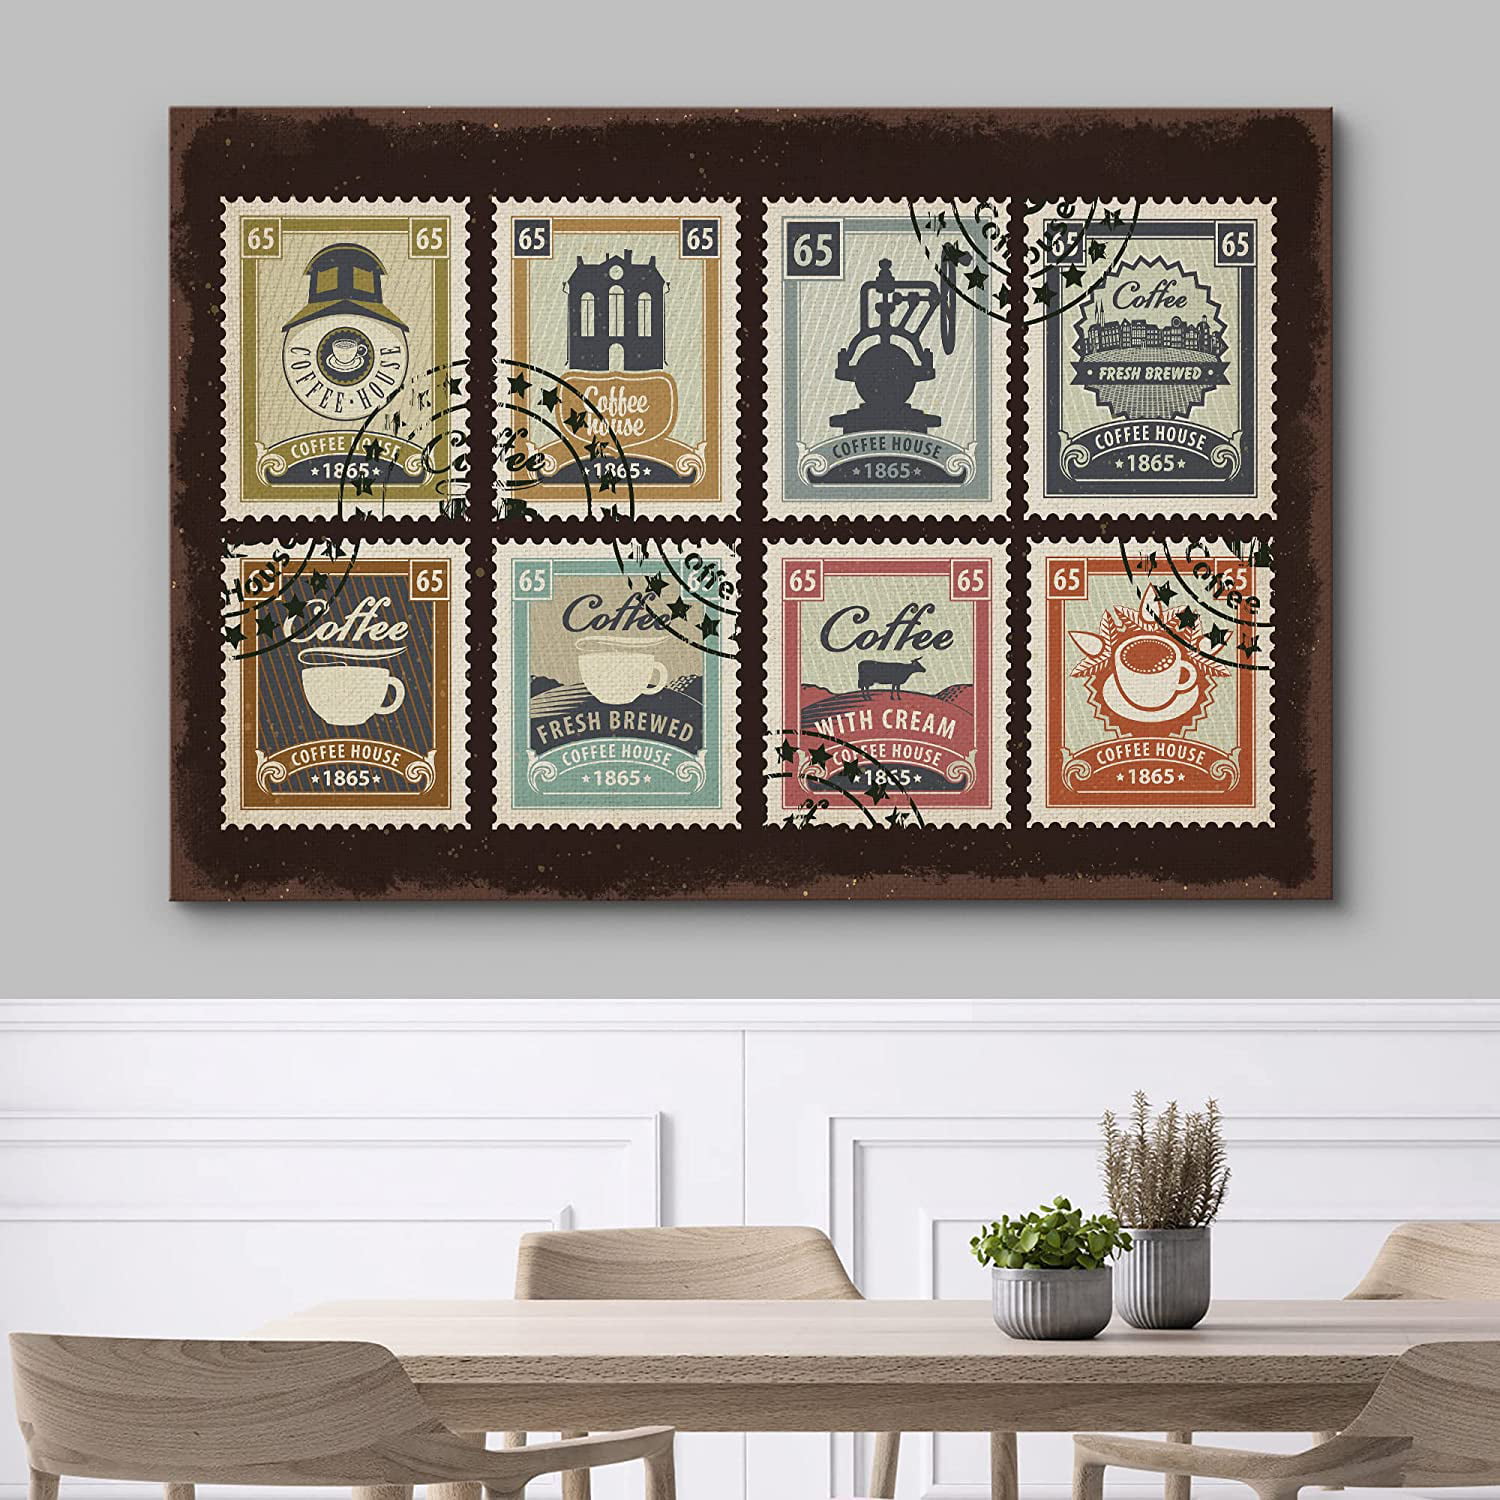 Canvas Print Wall Art New Orleans Style Coffee House Stamp Collage Food   Cooking Kitchen Illustrations Modern Art Decorative Rustic for Living Room,  Bedroom, Office 12"x18"